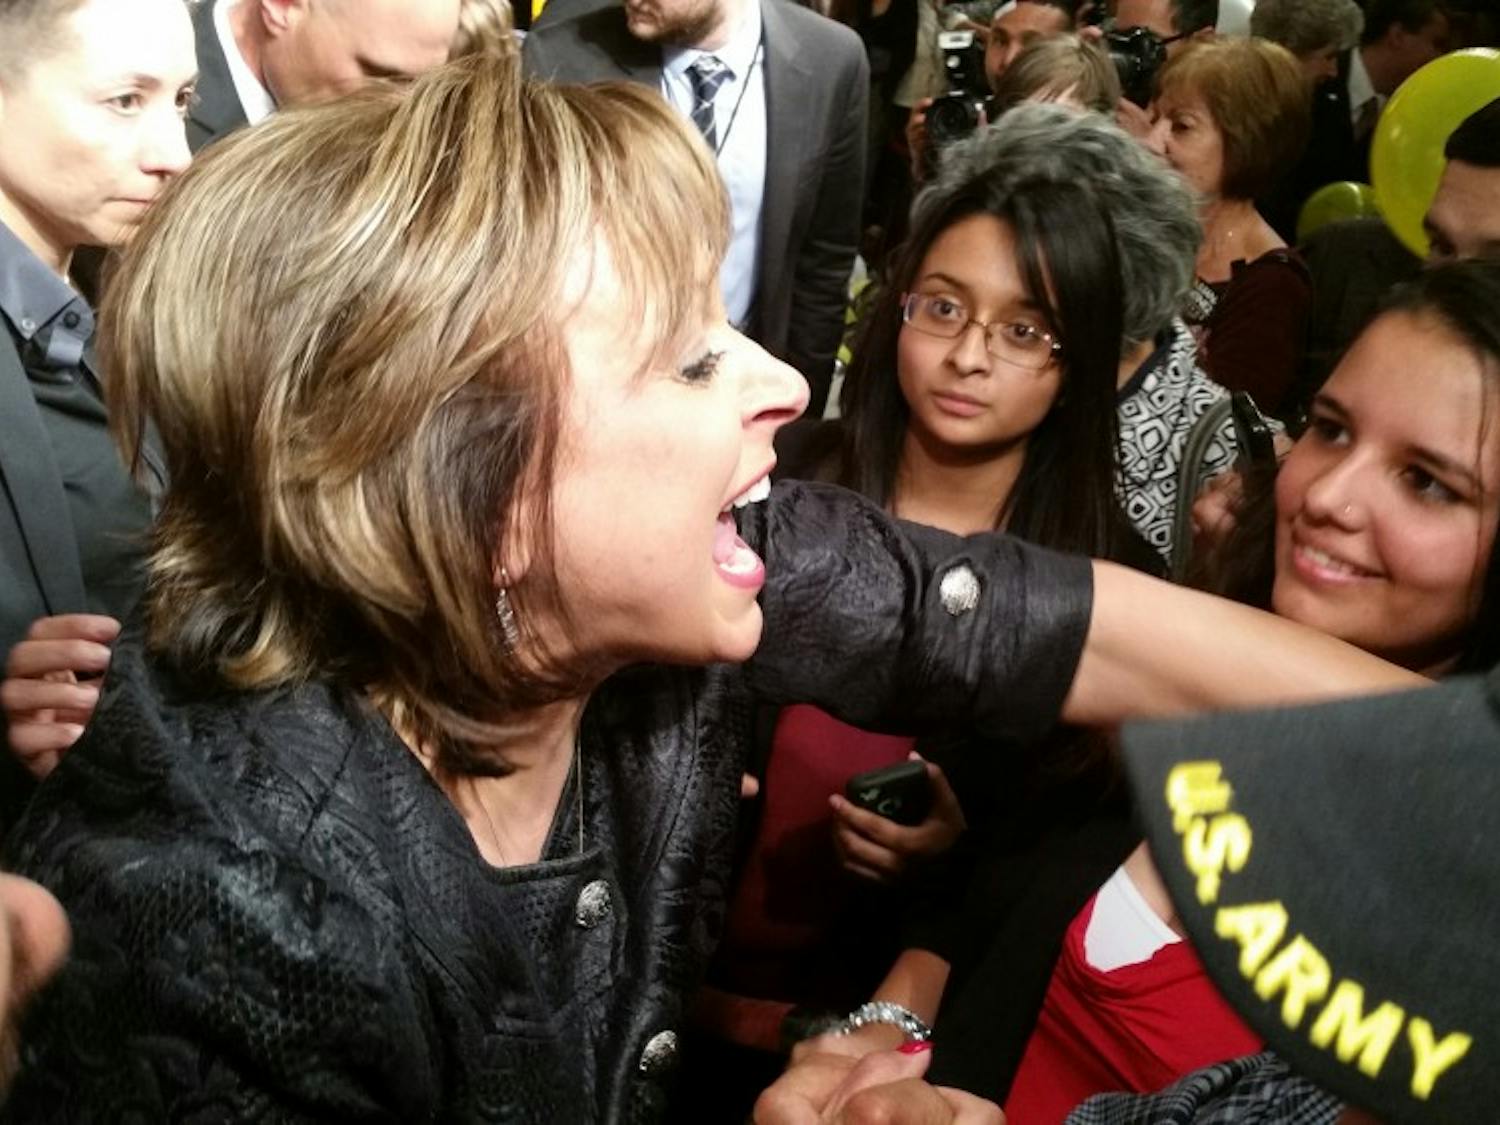 Gov. Susana Martinez greets supporters after giving a re-election victory speech Tuesday night at the Albuquerque Marriott.